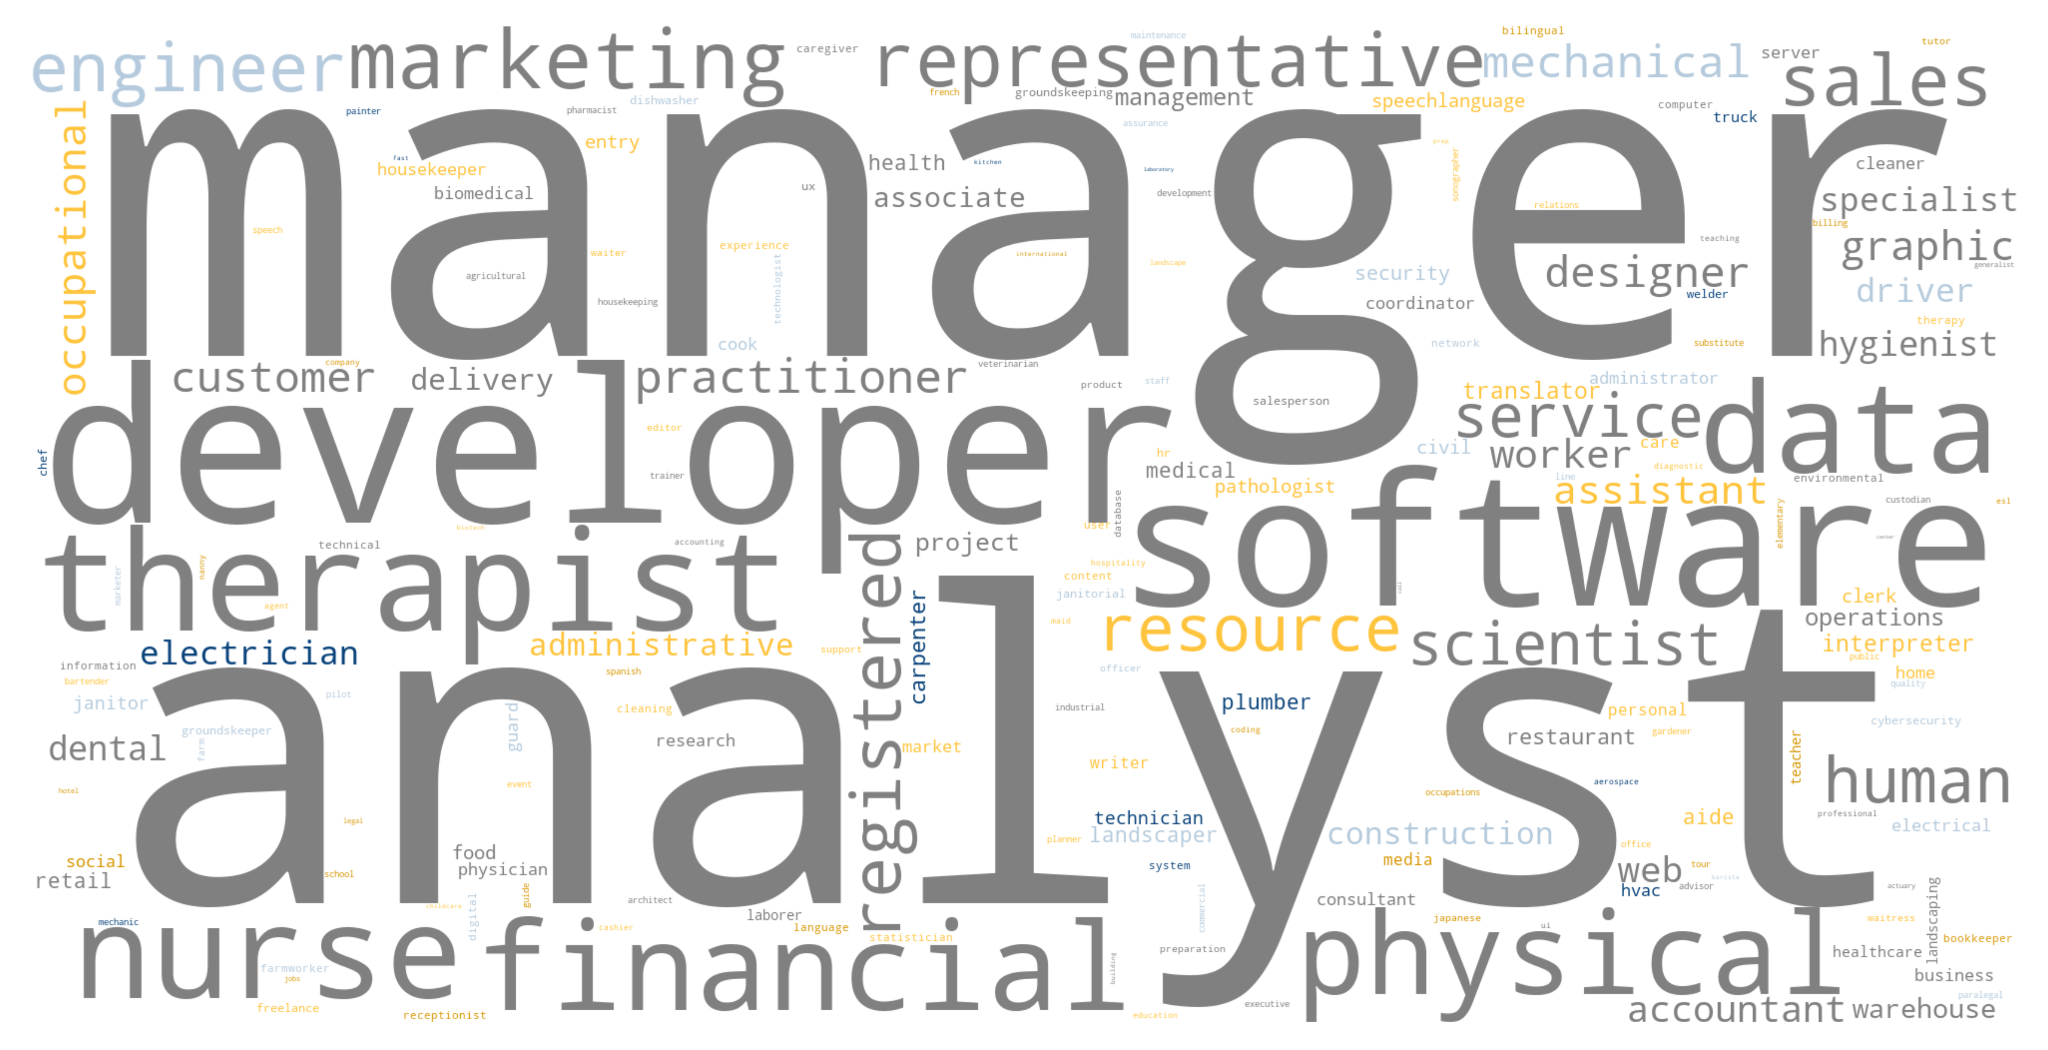 Word cloud visualization of all job titles.